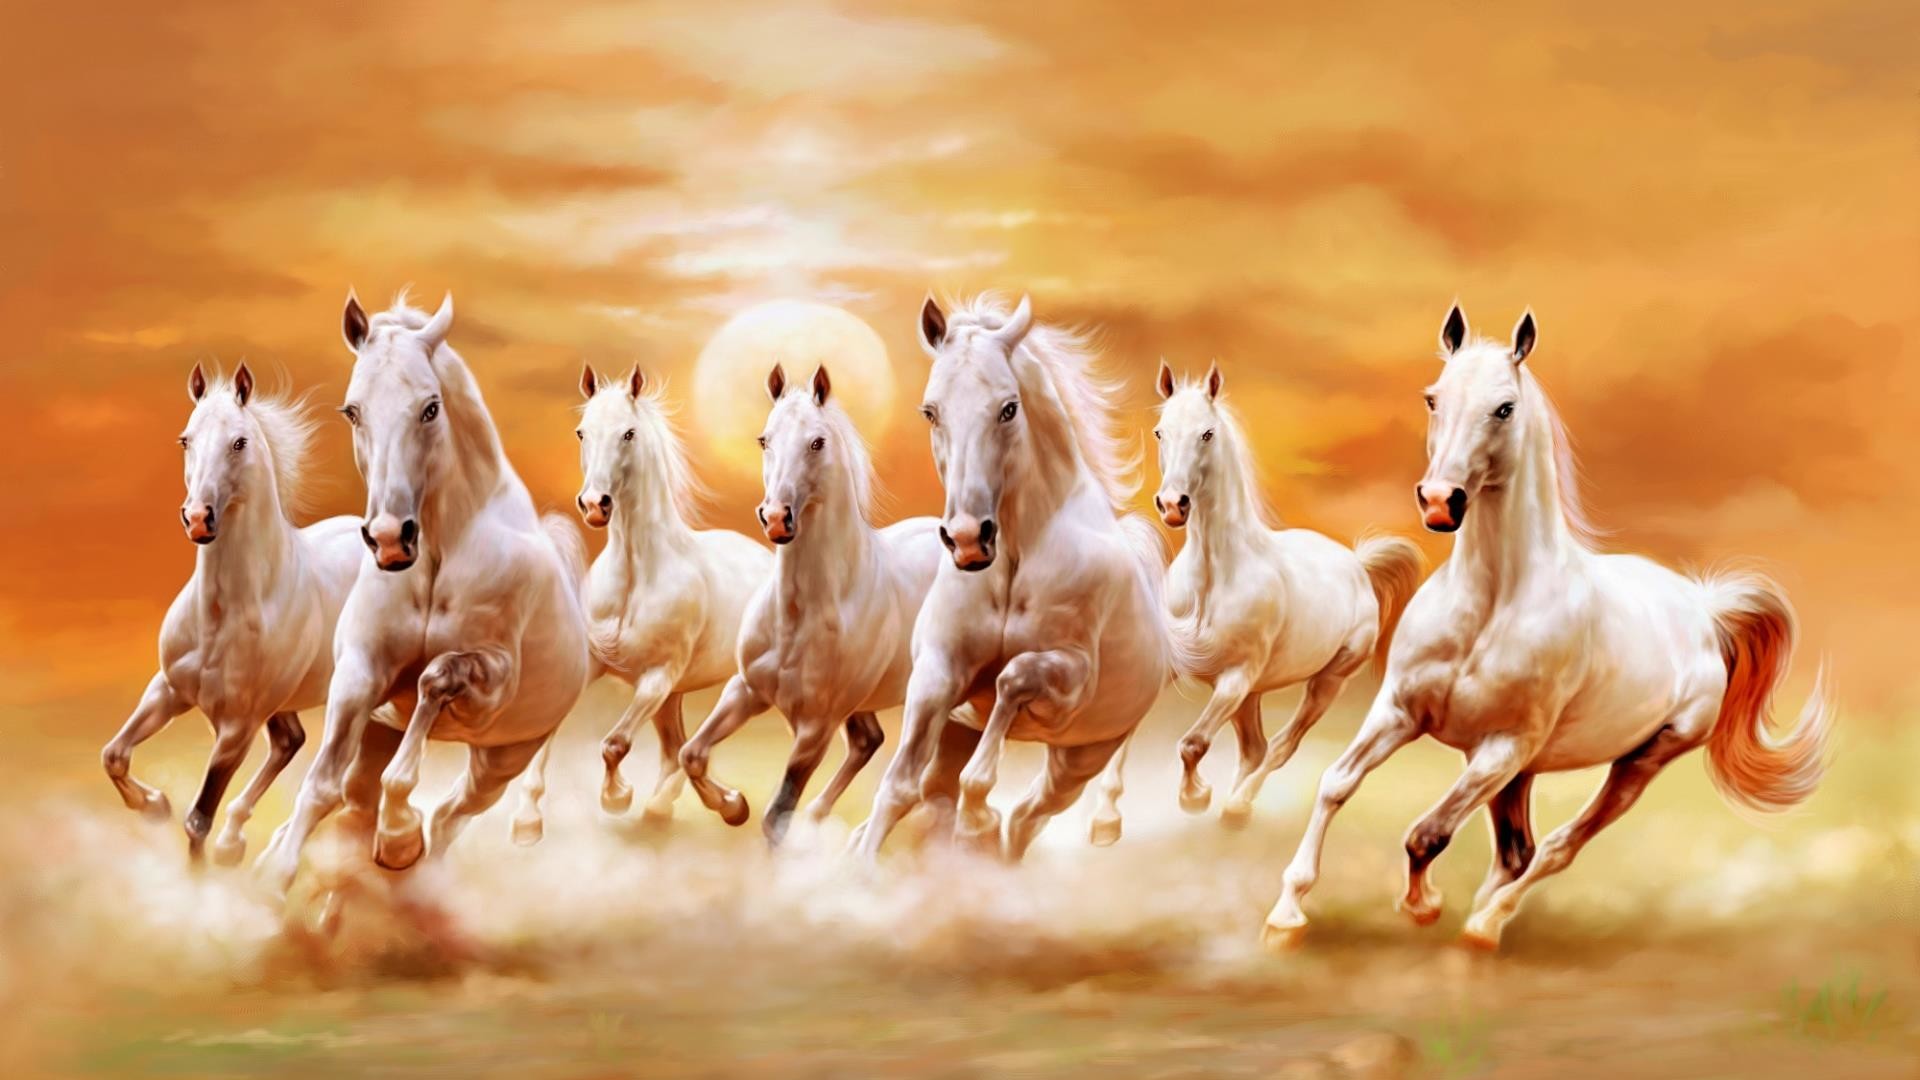 1920x1080 white horse - Download Hd white horse wallpaper for desktop and mobile  device. Best wide white horsefree background images.